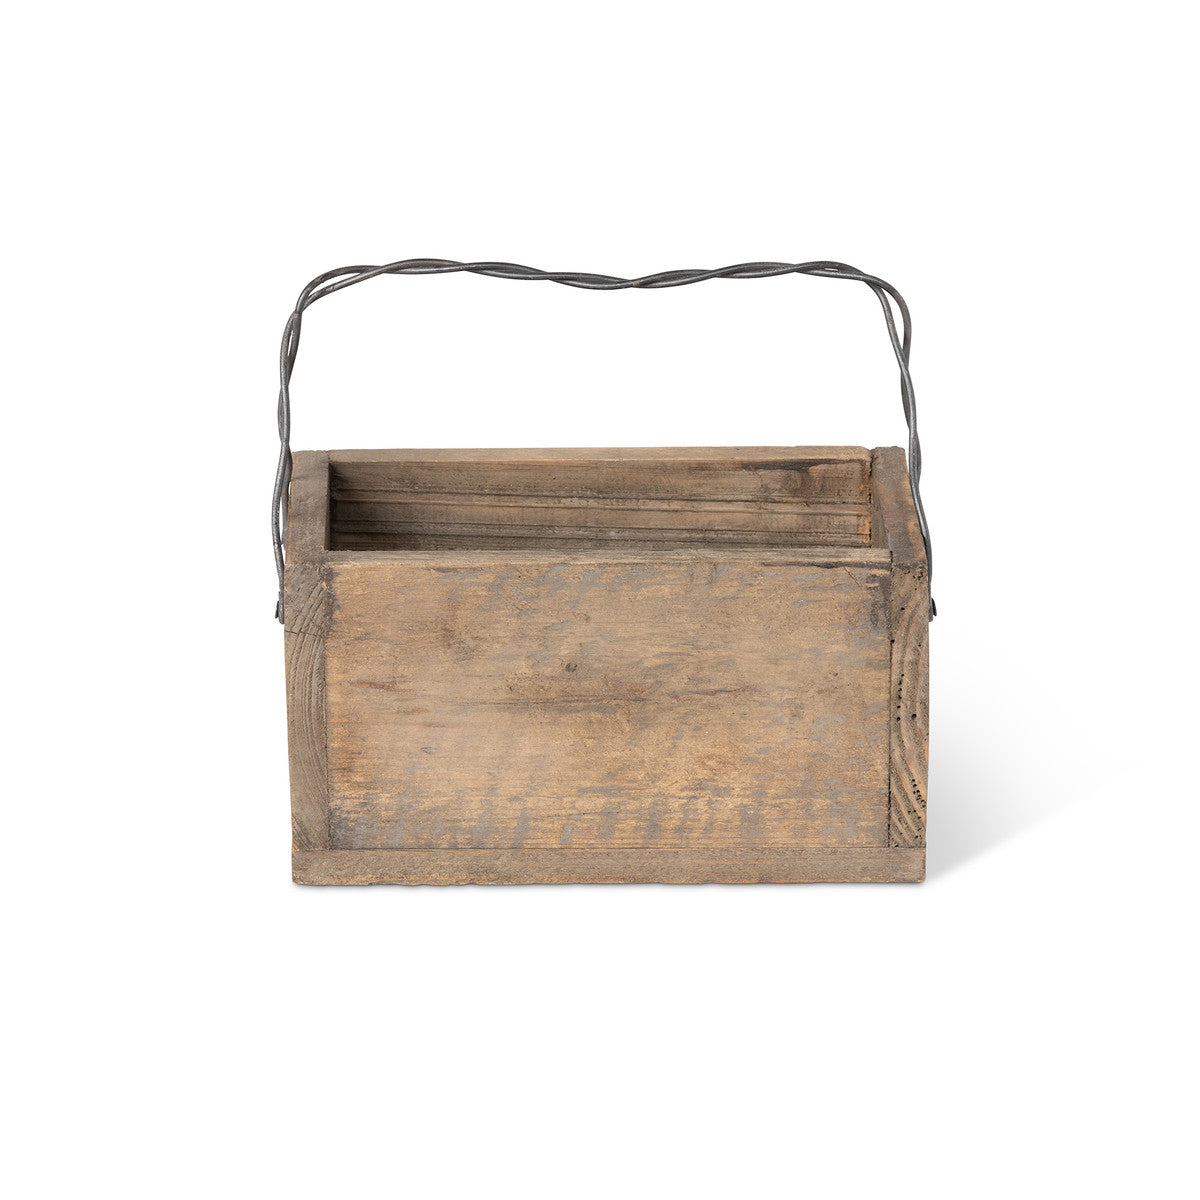 Primitive Wood Box with Wire Handle